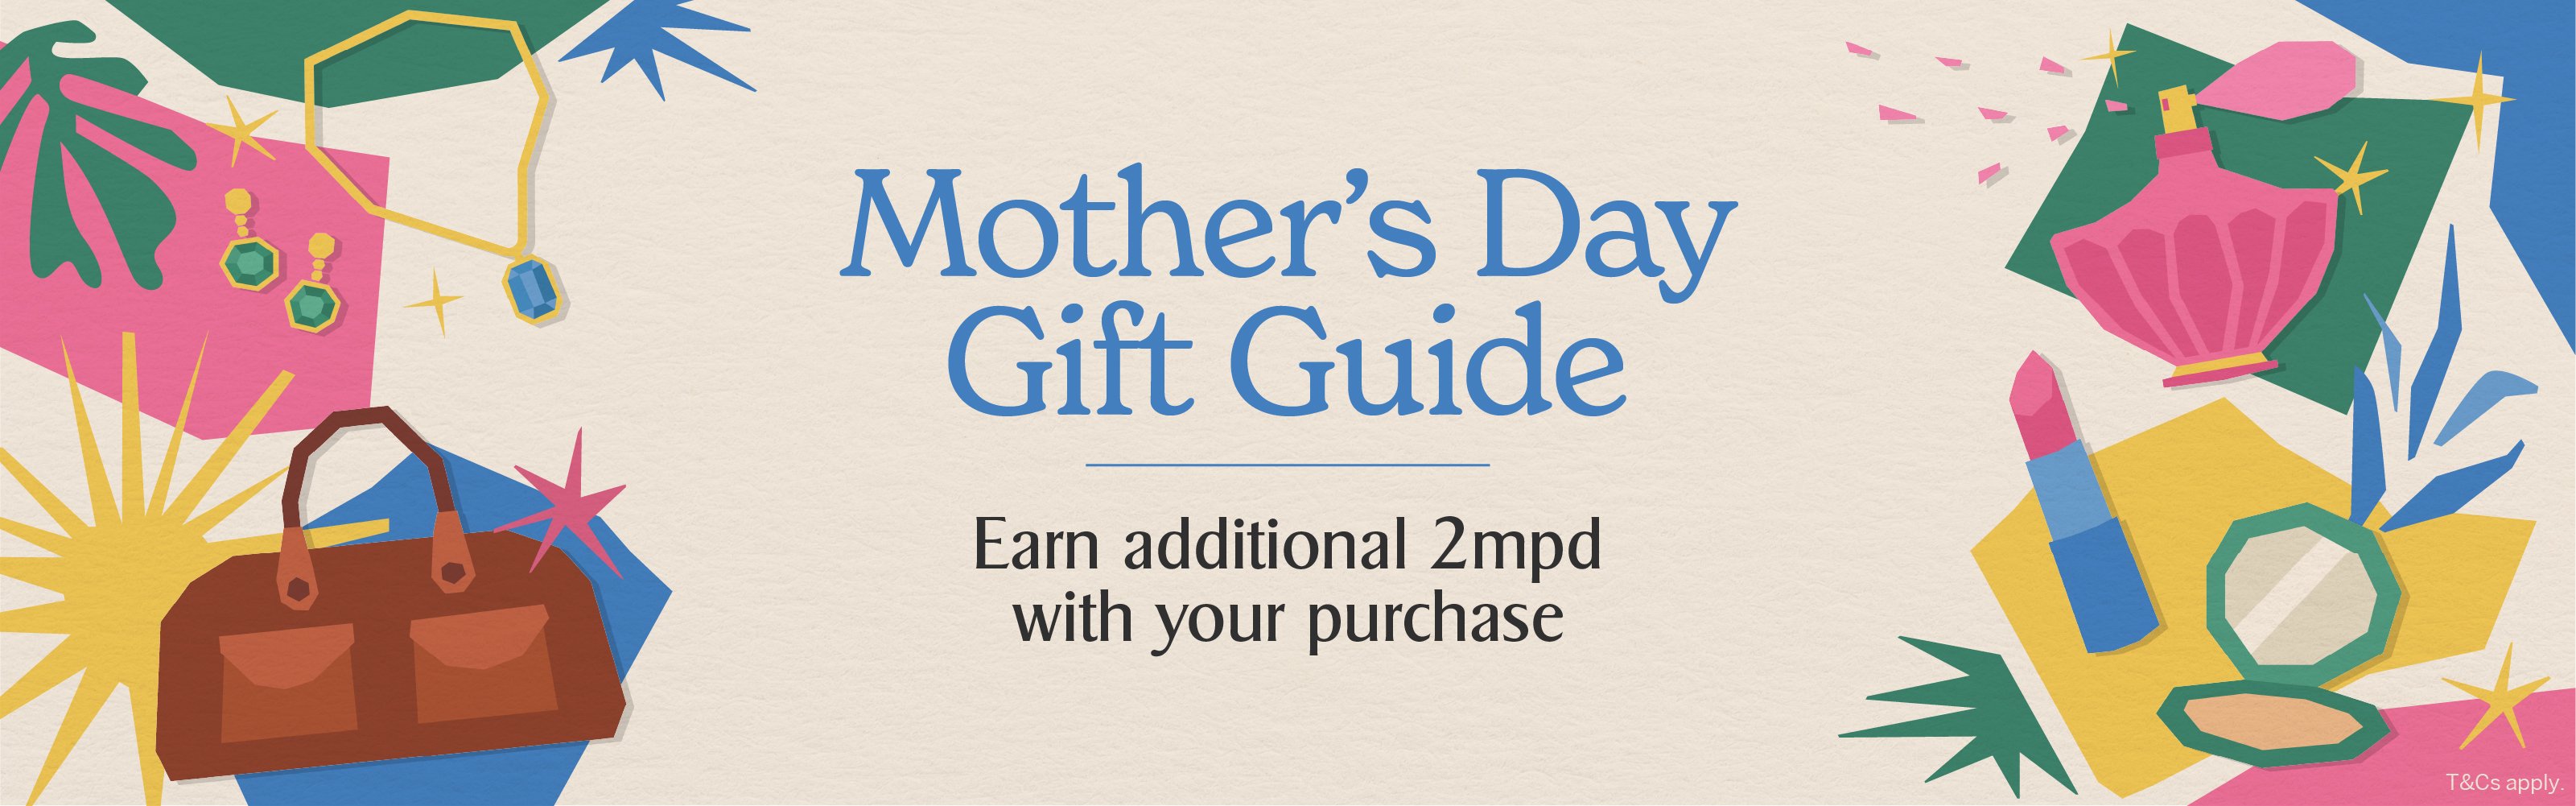 KrisShop Mother's Day Gift Guide